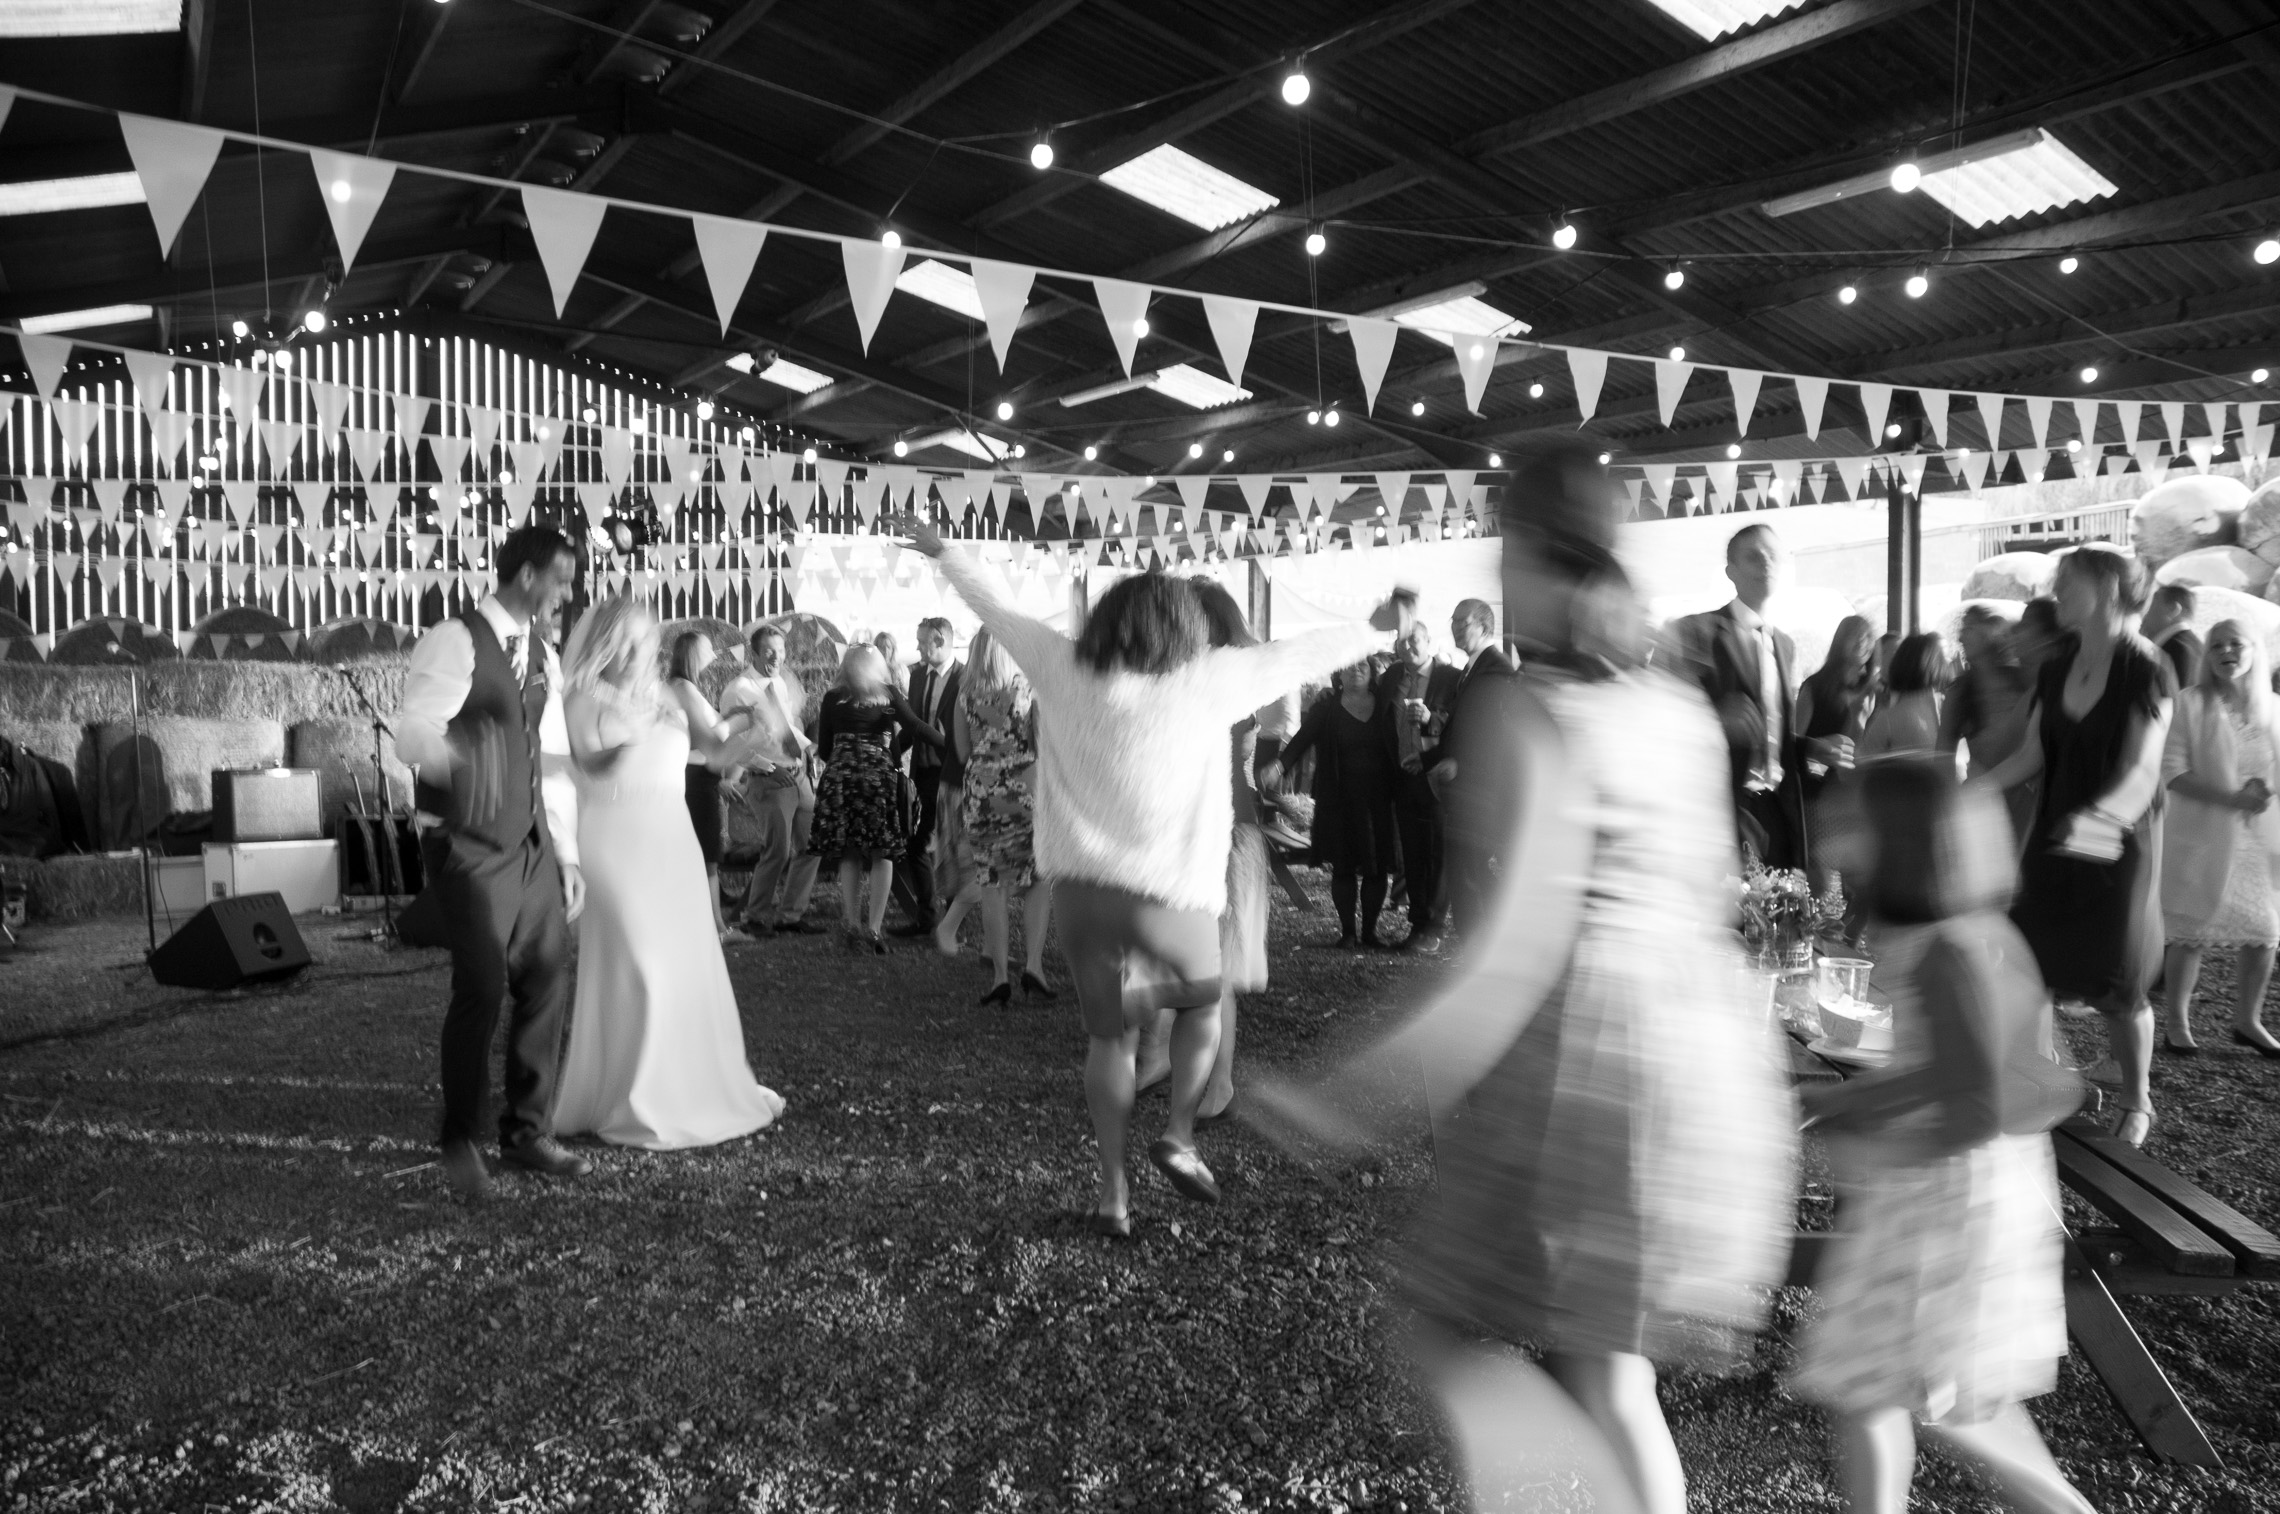 Bride and groom in the barn with guests